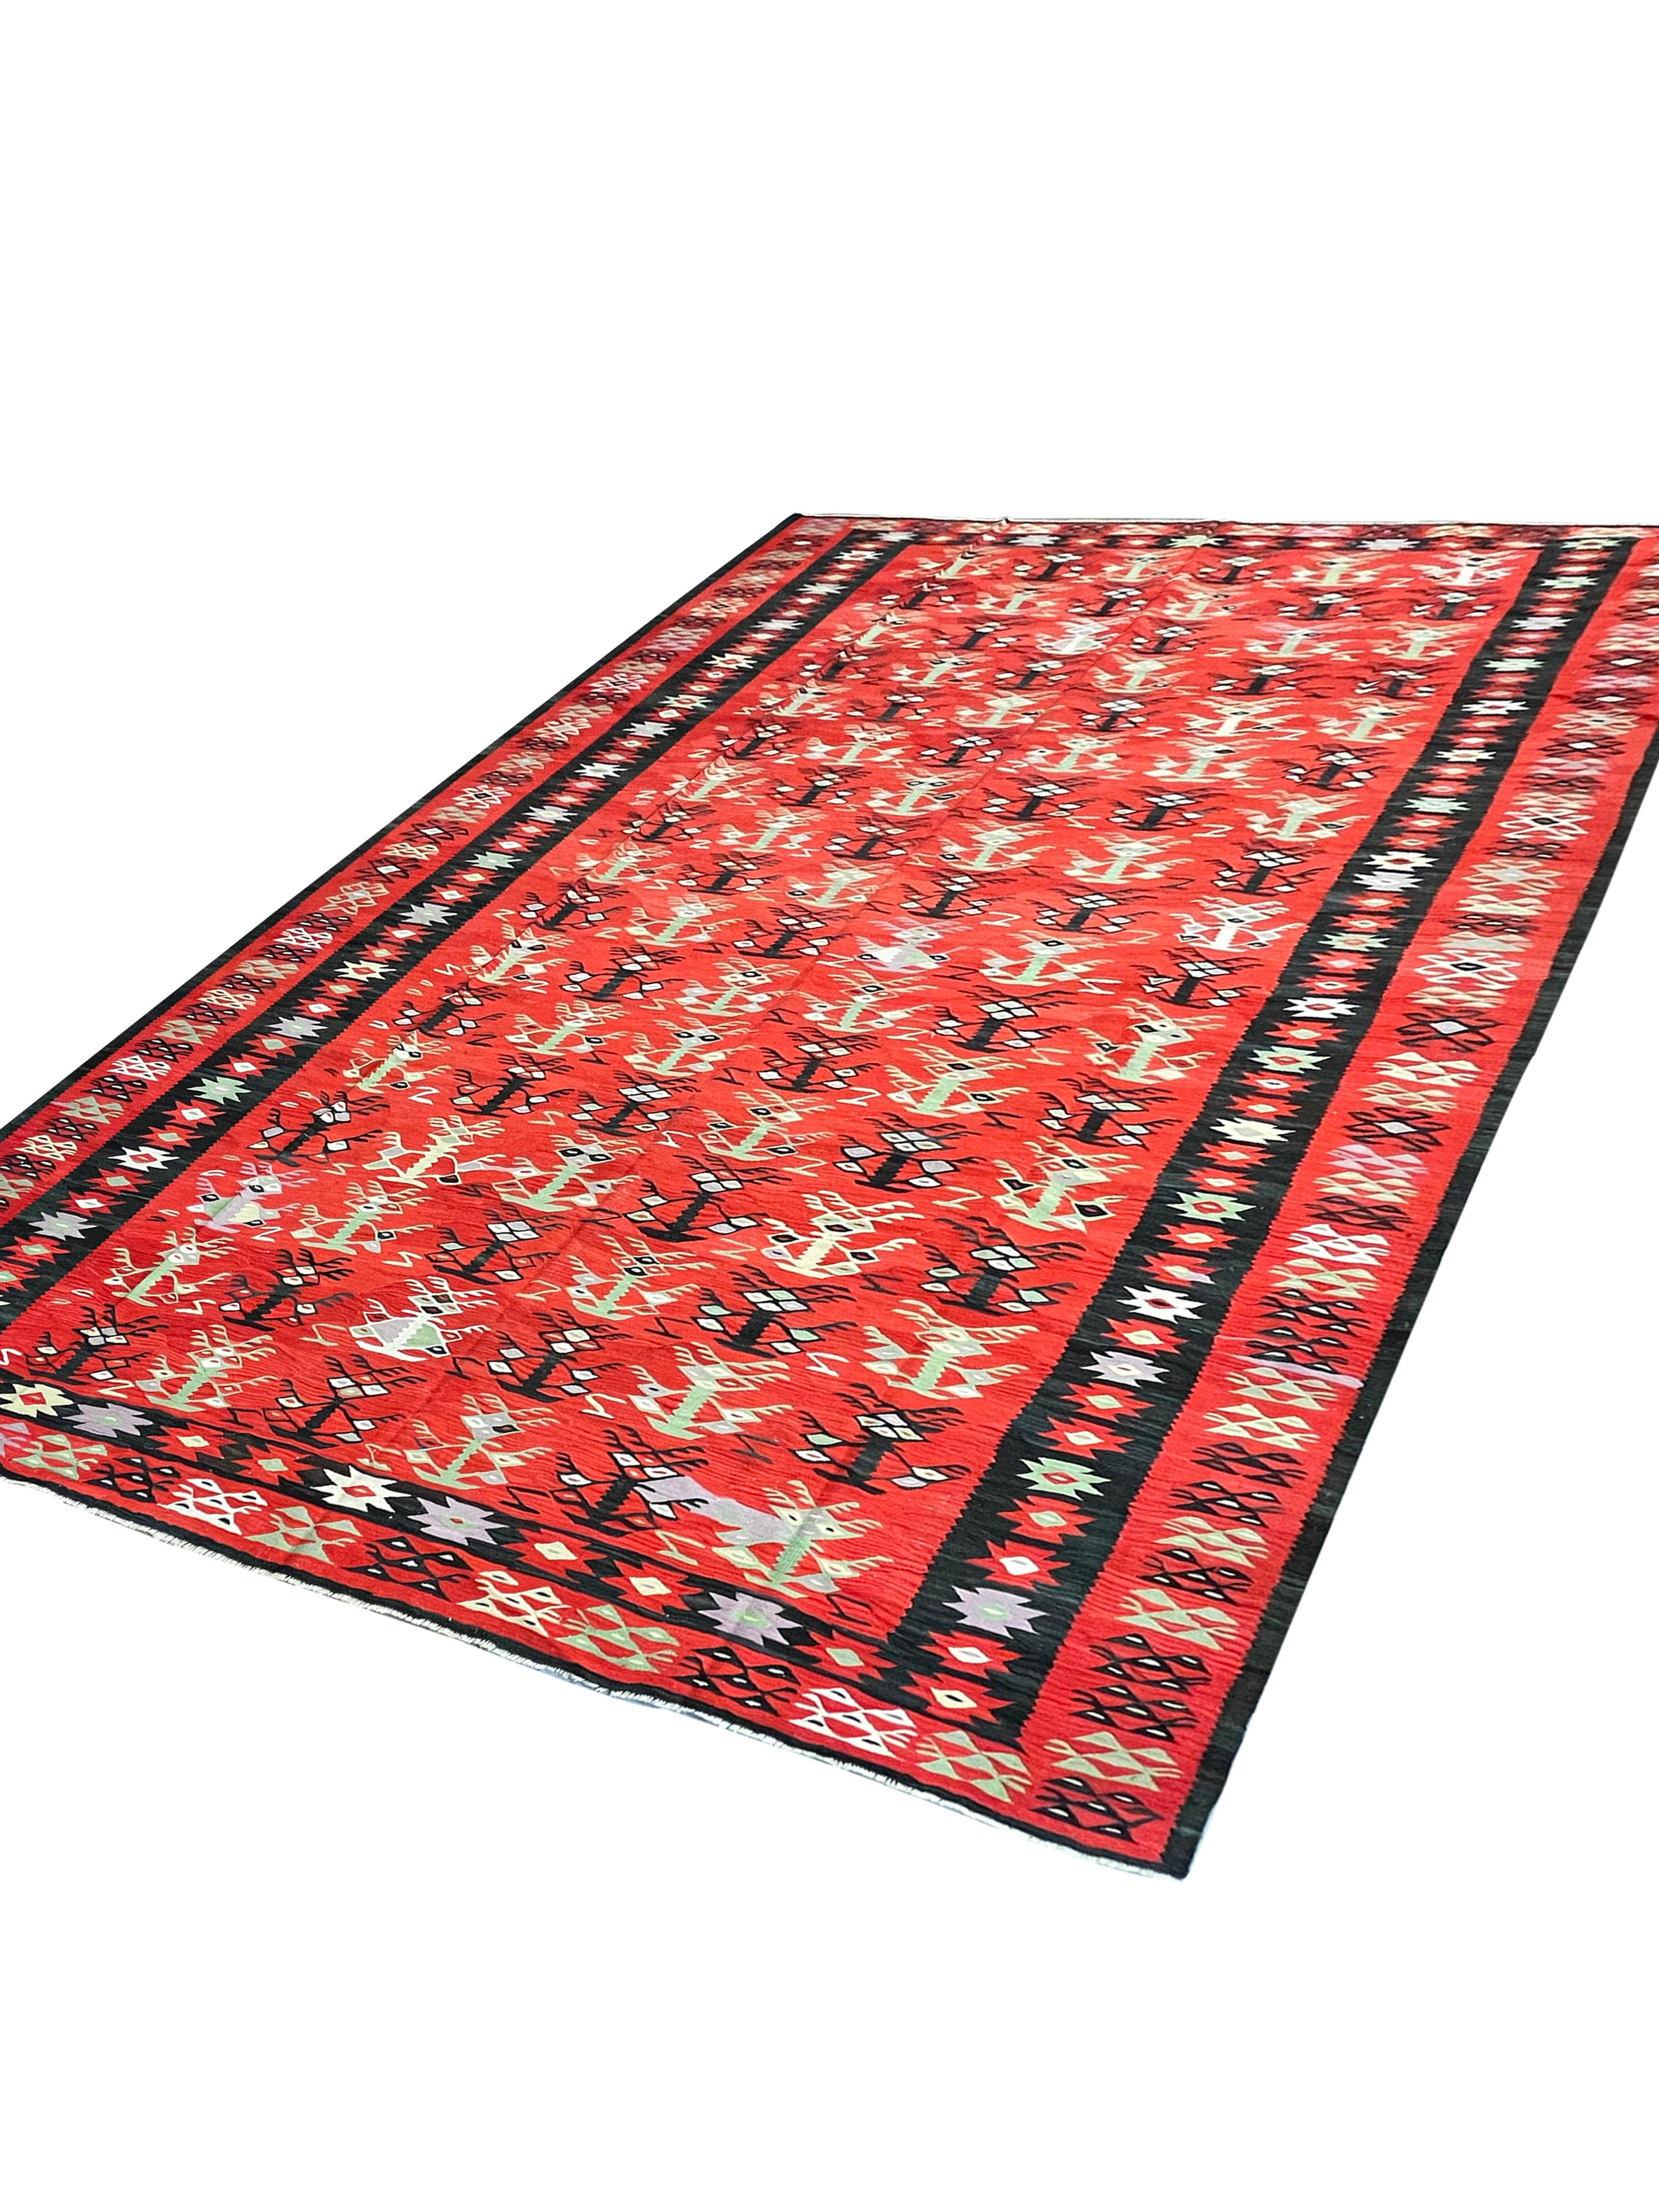 Country Antique Kilim Rug Turkish Handmade Carpet Flatwoven Red Geometric Rug For Sale